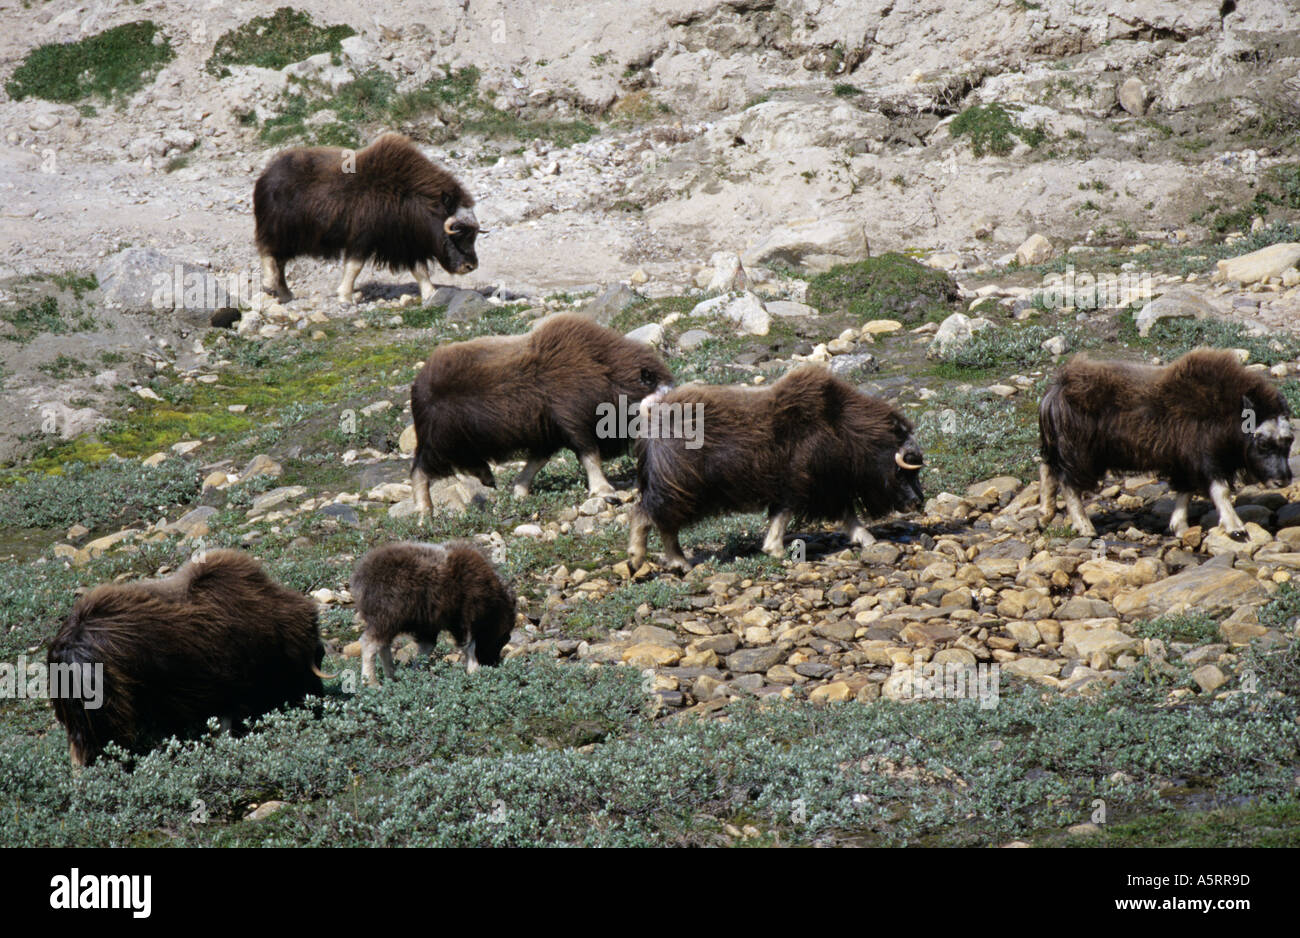 herd of musk oxen Ovibos moschatus in Dovrefjell Nationalpark Norway Stock Photo